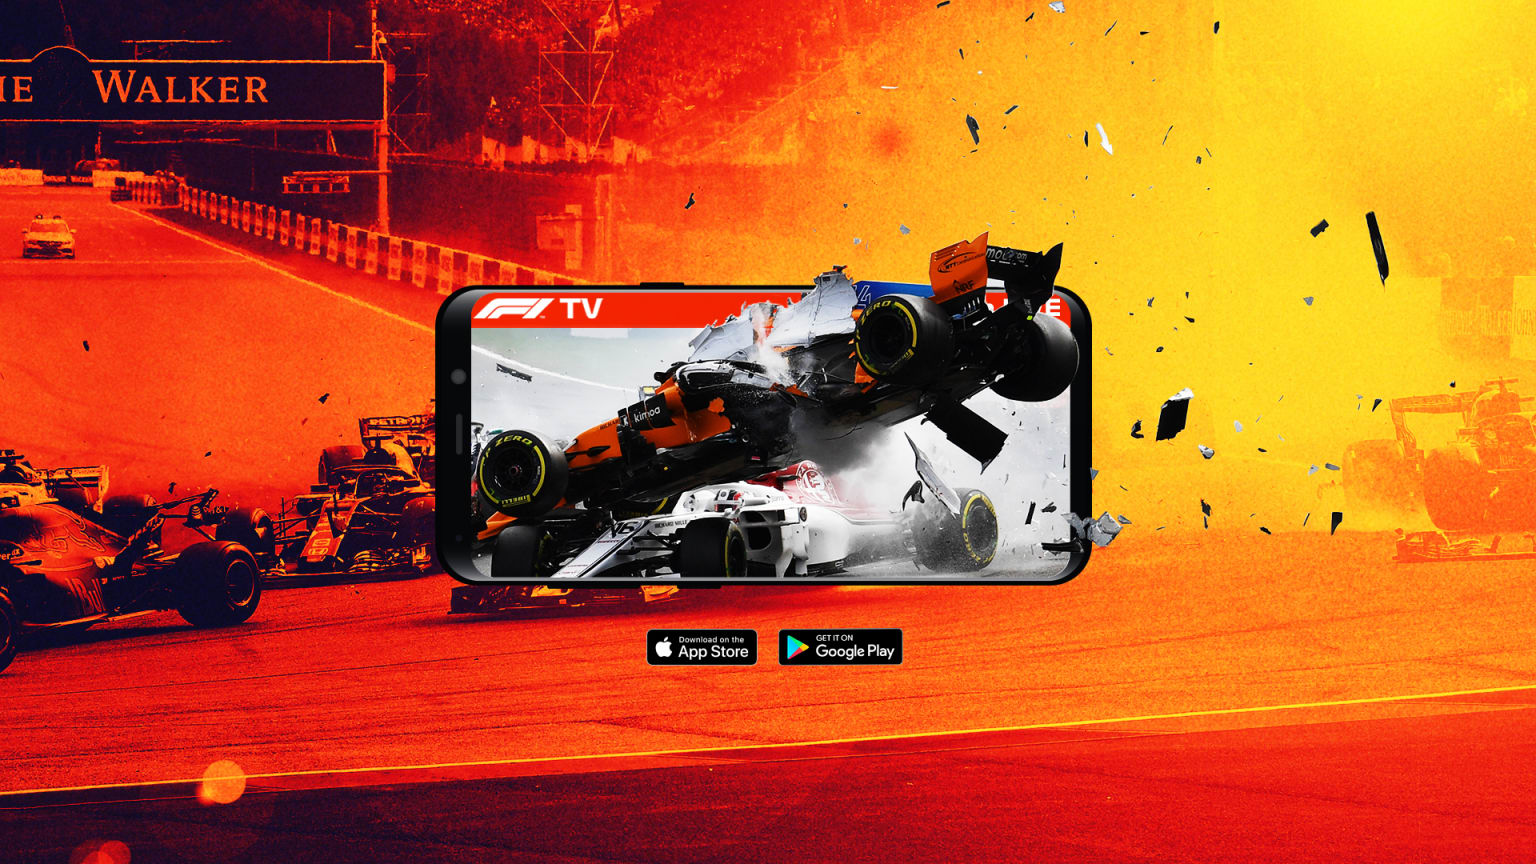 F1 TV app is now live on iOS and Android